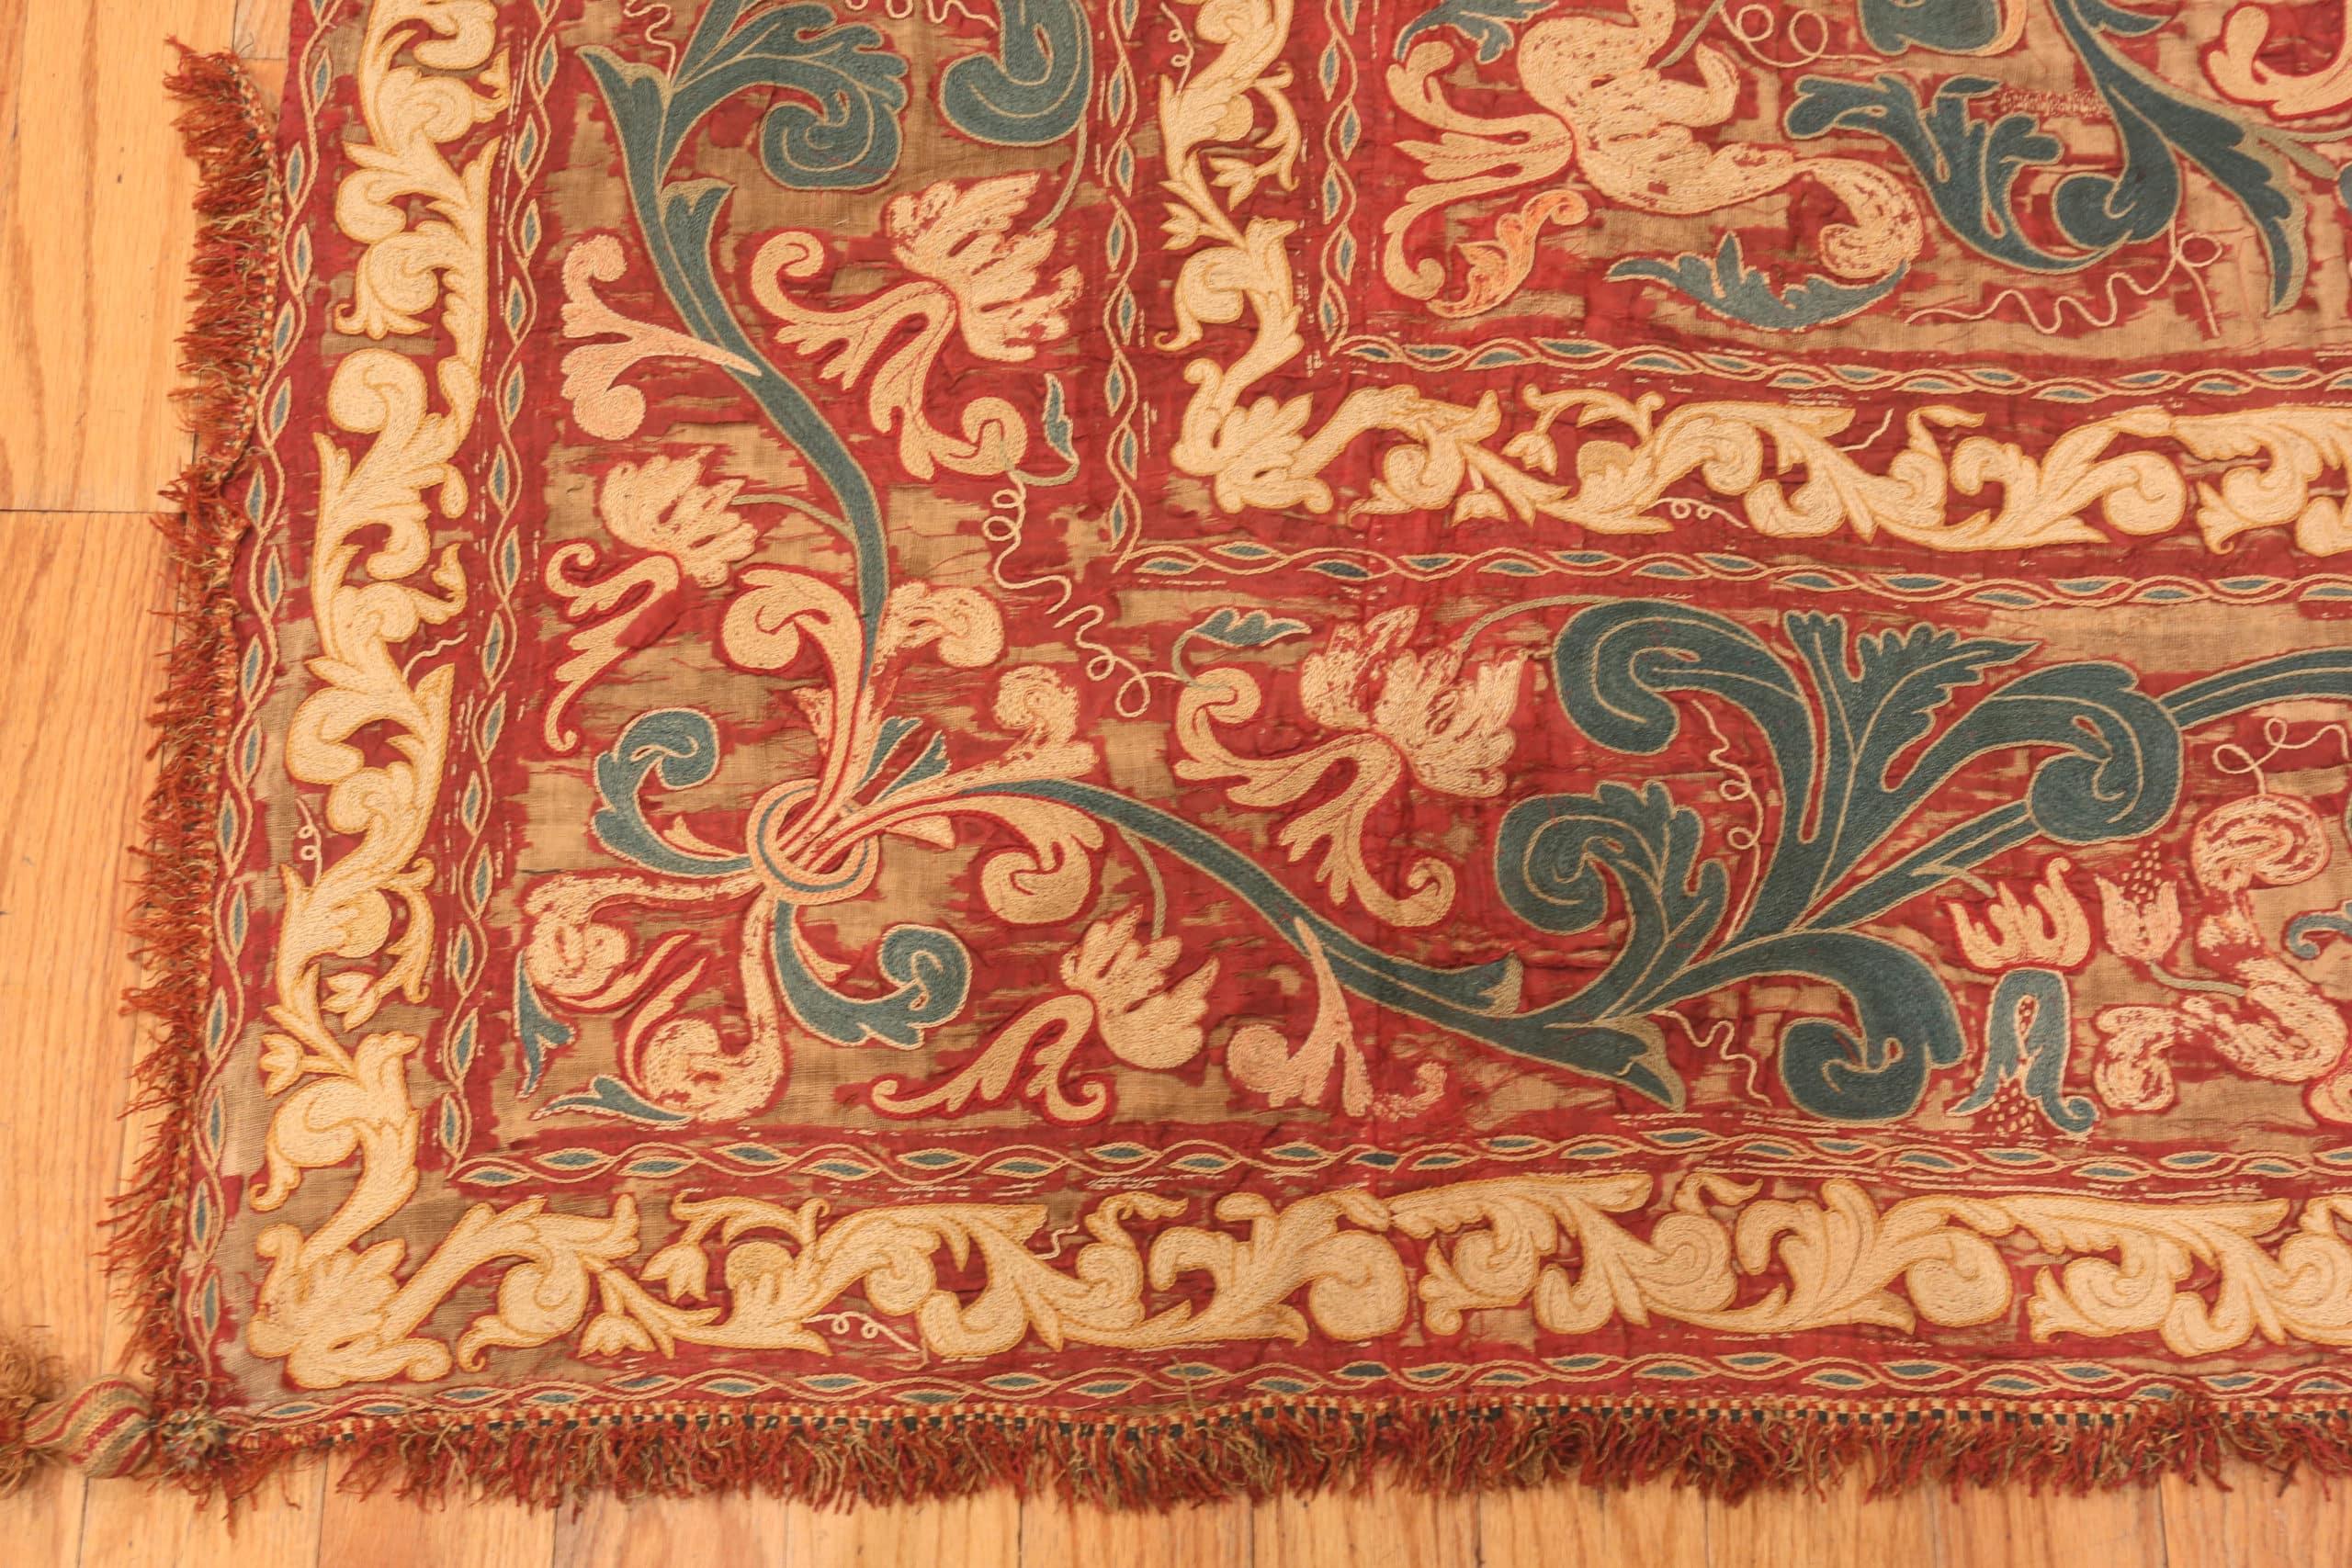 18th Century and Earlier Gorgeous 17th Century Antique Italian Silk Embroidery Textile 6'2